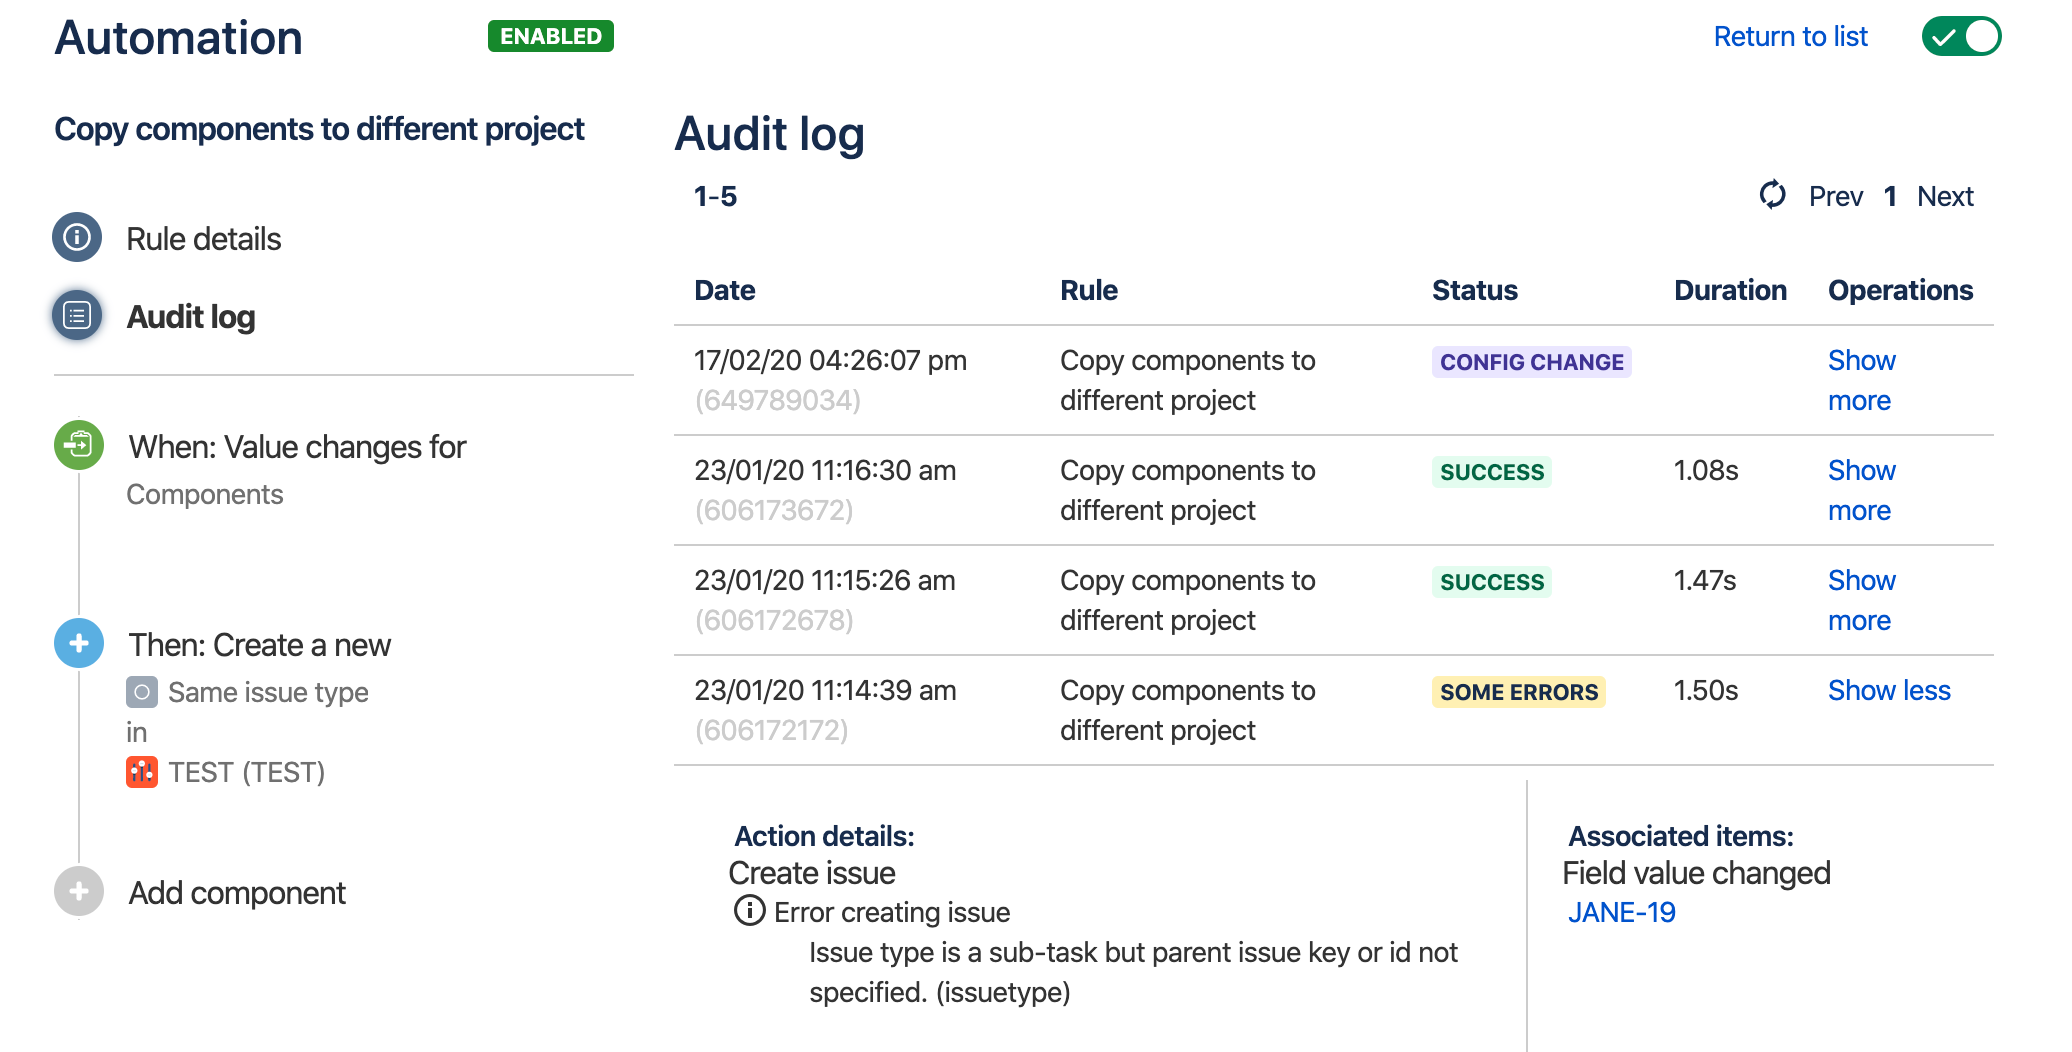 Audit log in Jira automation, showing a rule has run twice successfully, once with errors, and once with config changes.